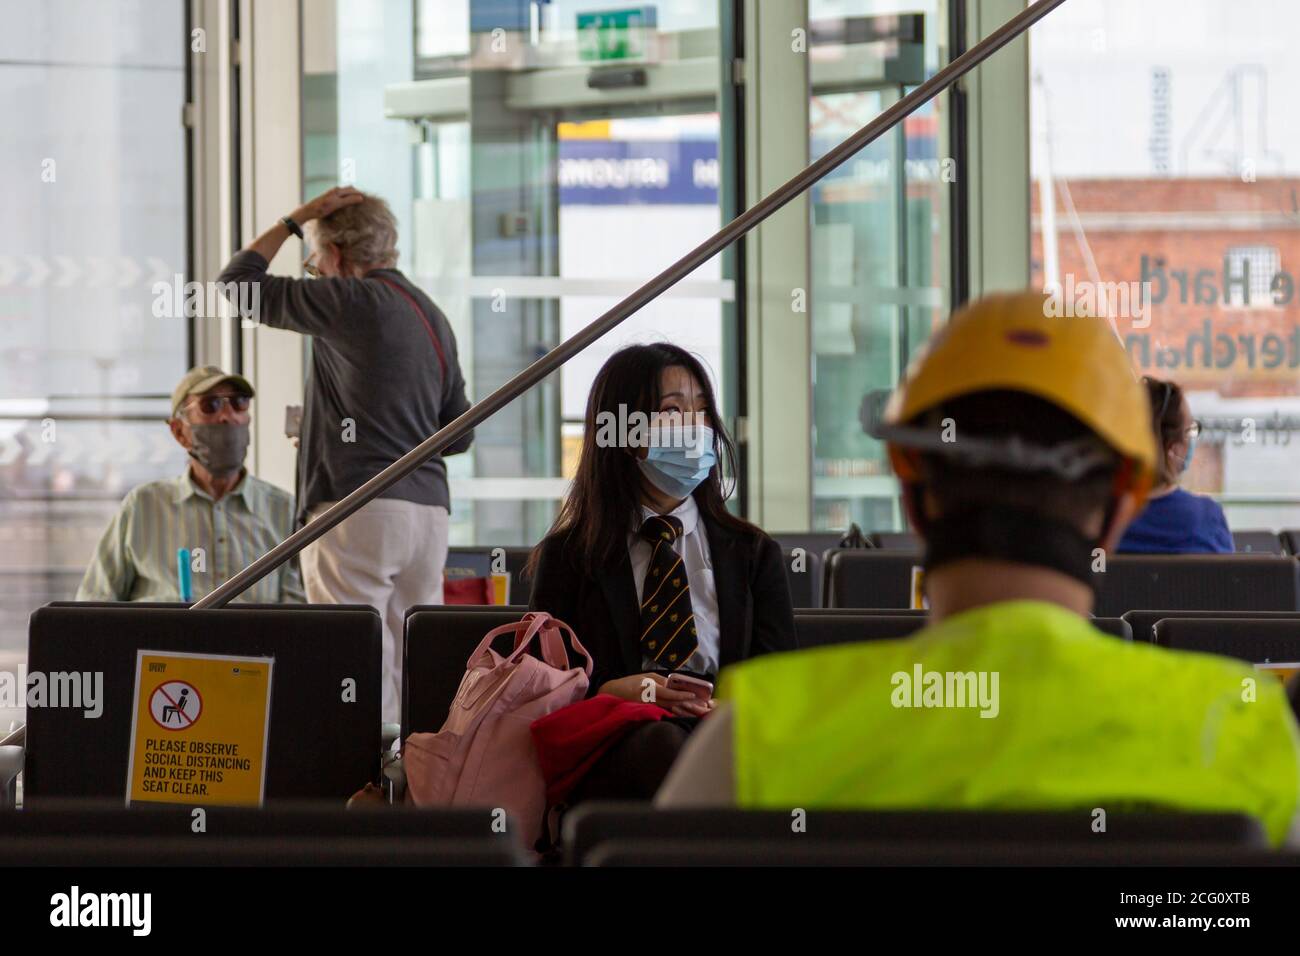 A young Asian school girl in uniform wearing a medical face mask or face covering will sitting waiting for a bus in a bus station Stock Photo